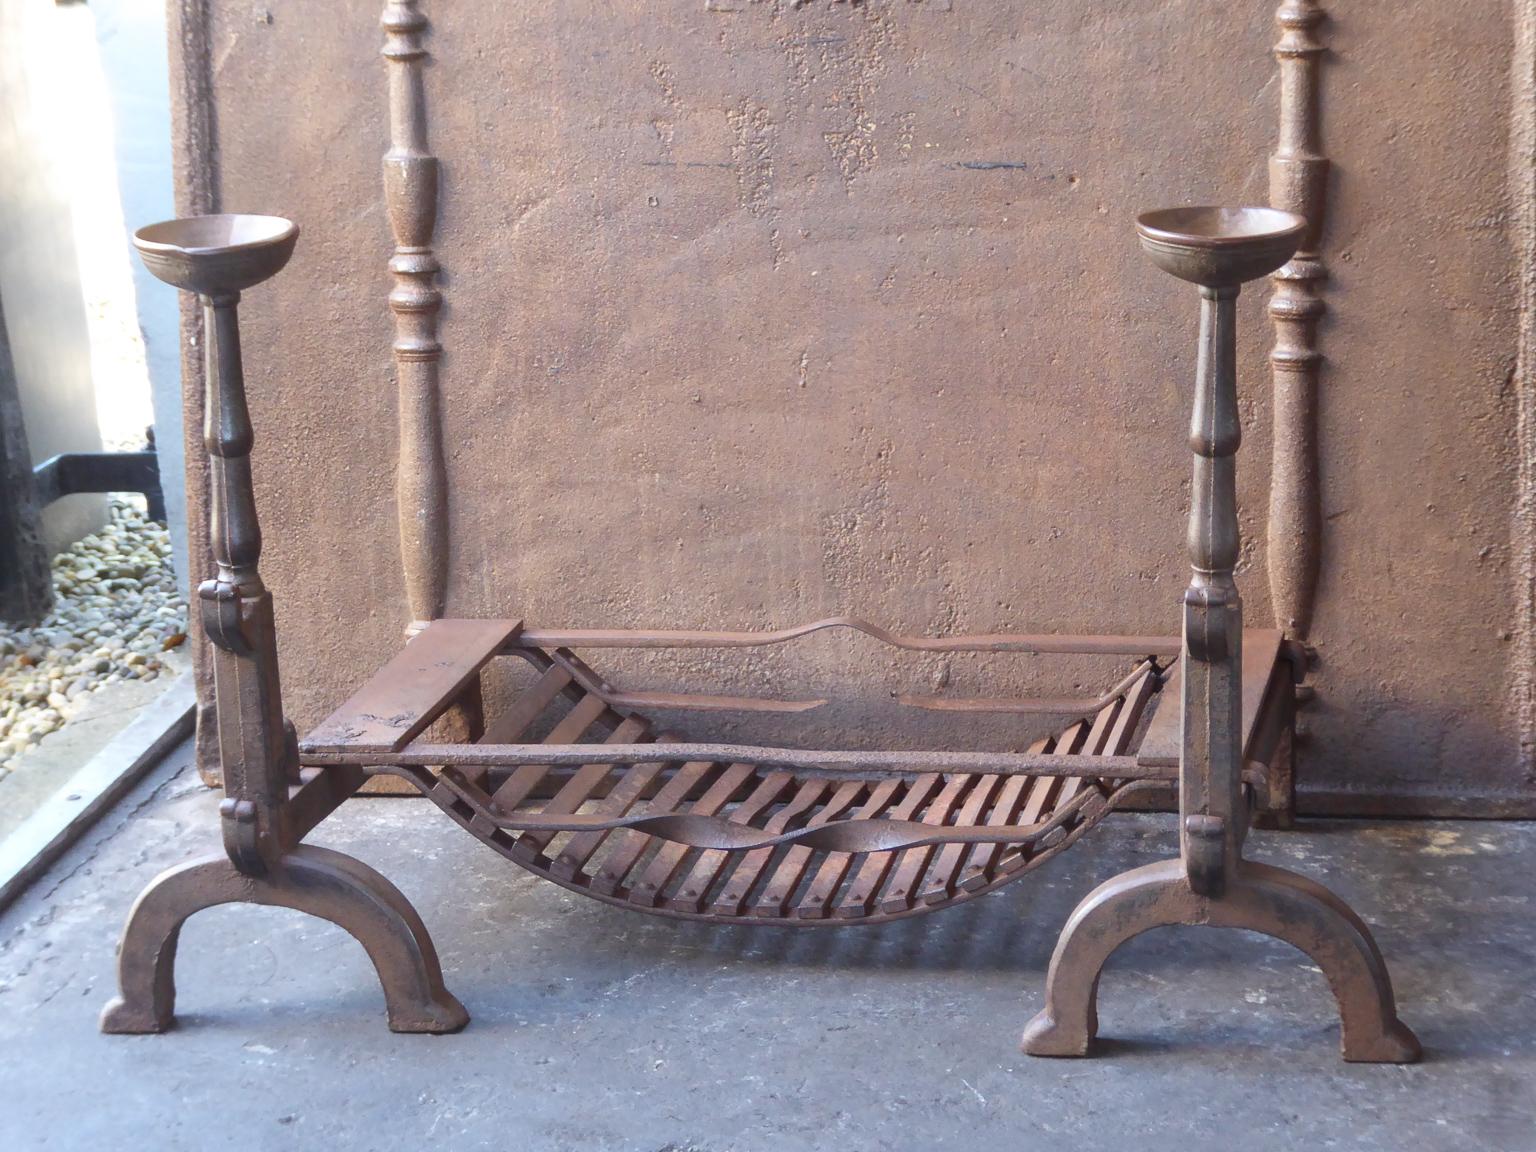 19th century English Victorian fireplace grate made of cast iron and wrought iron. The grate has a natural brown patina. Upon request it can be made black. The total width of the front of the grate is 37.5 inch (95 cm).